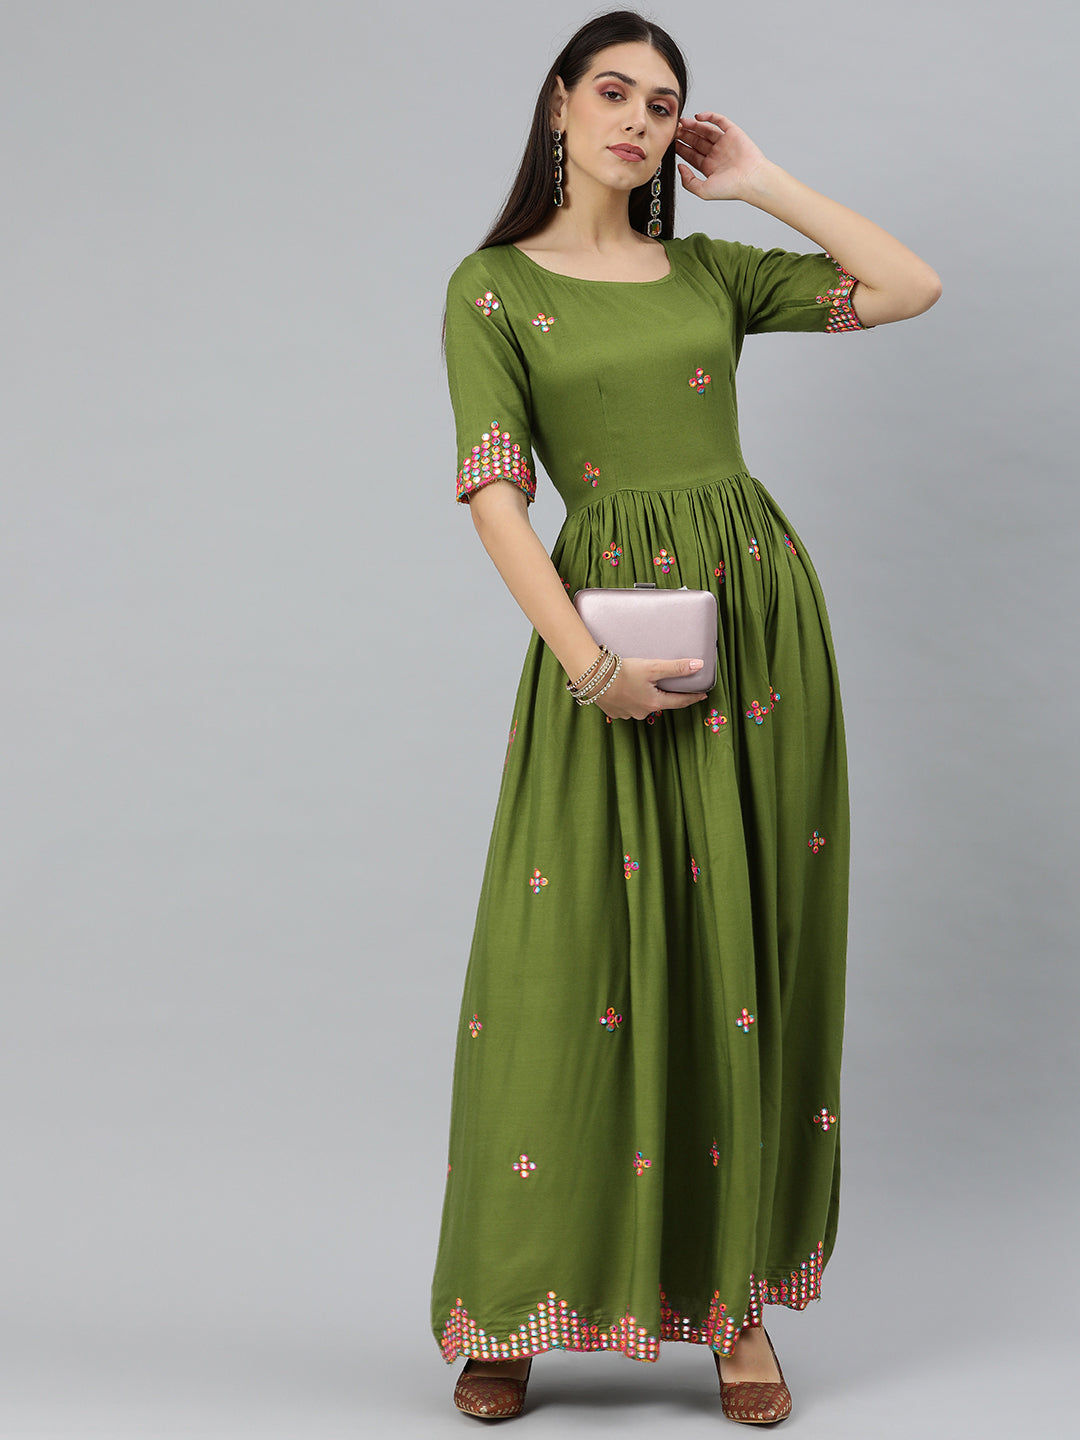 Light dress, ethnic embroideries, half-puff sleeves, elasticated wrists,  flared bottom